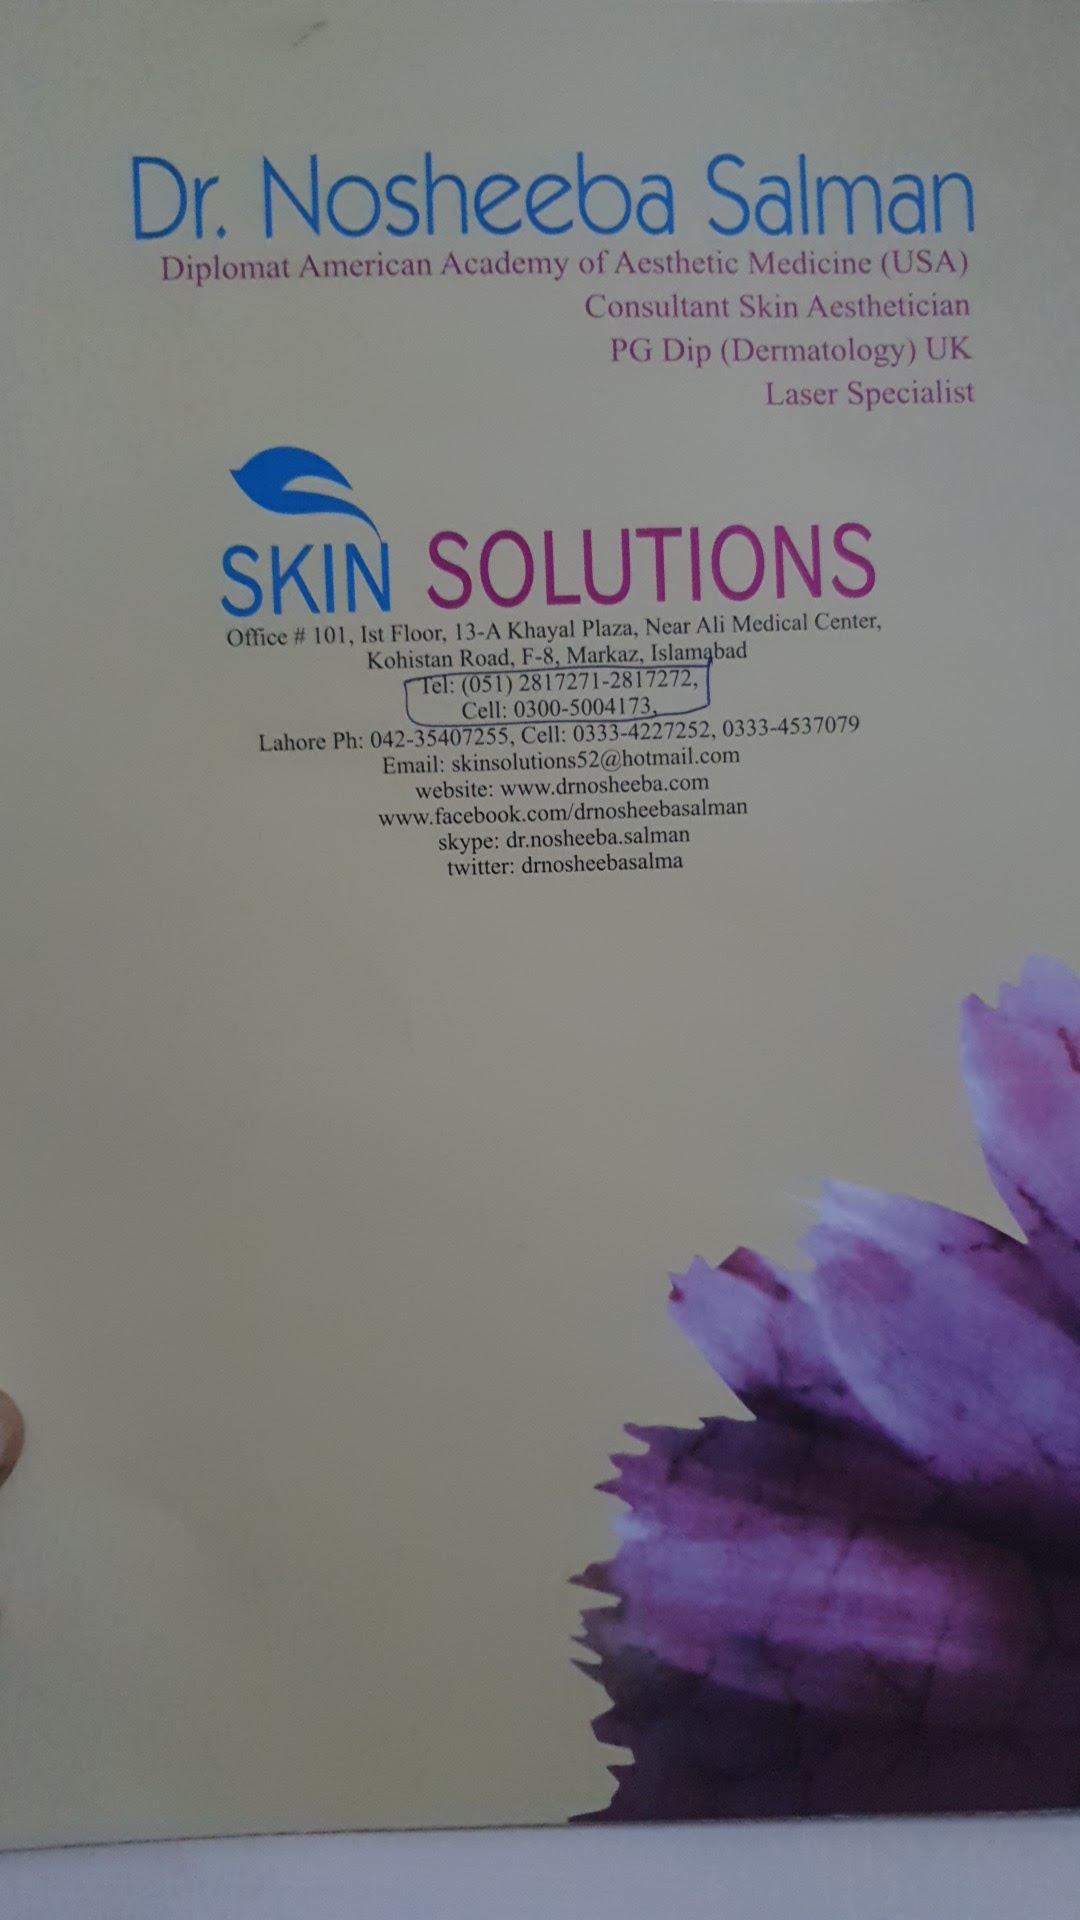 Skin solutions